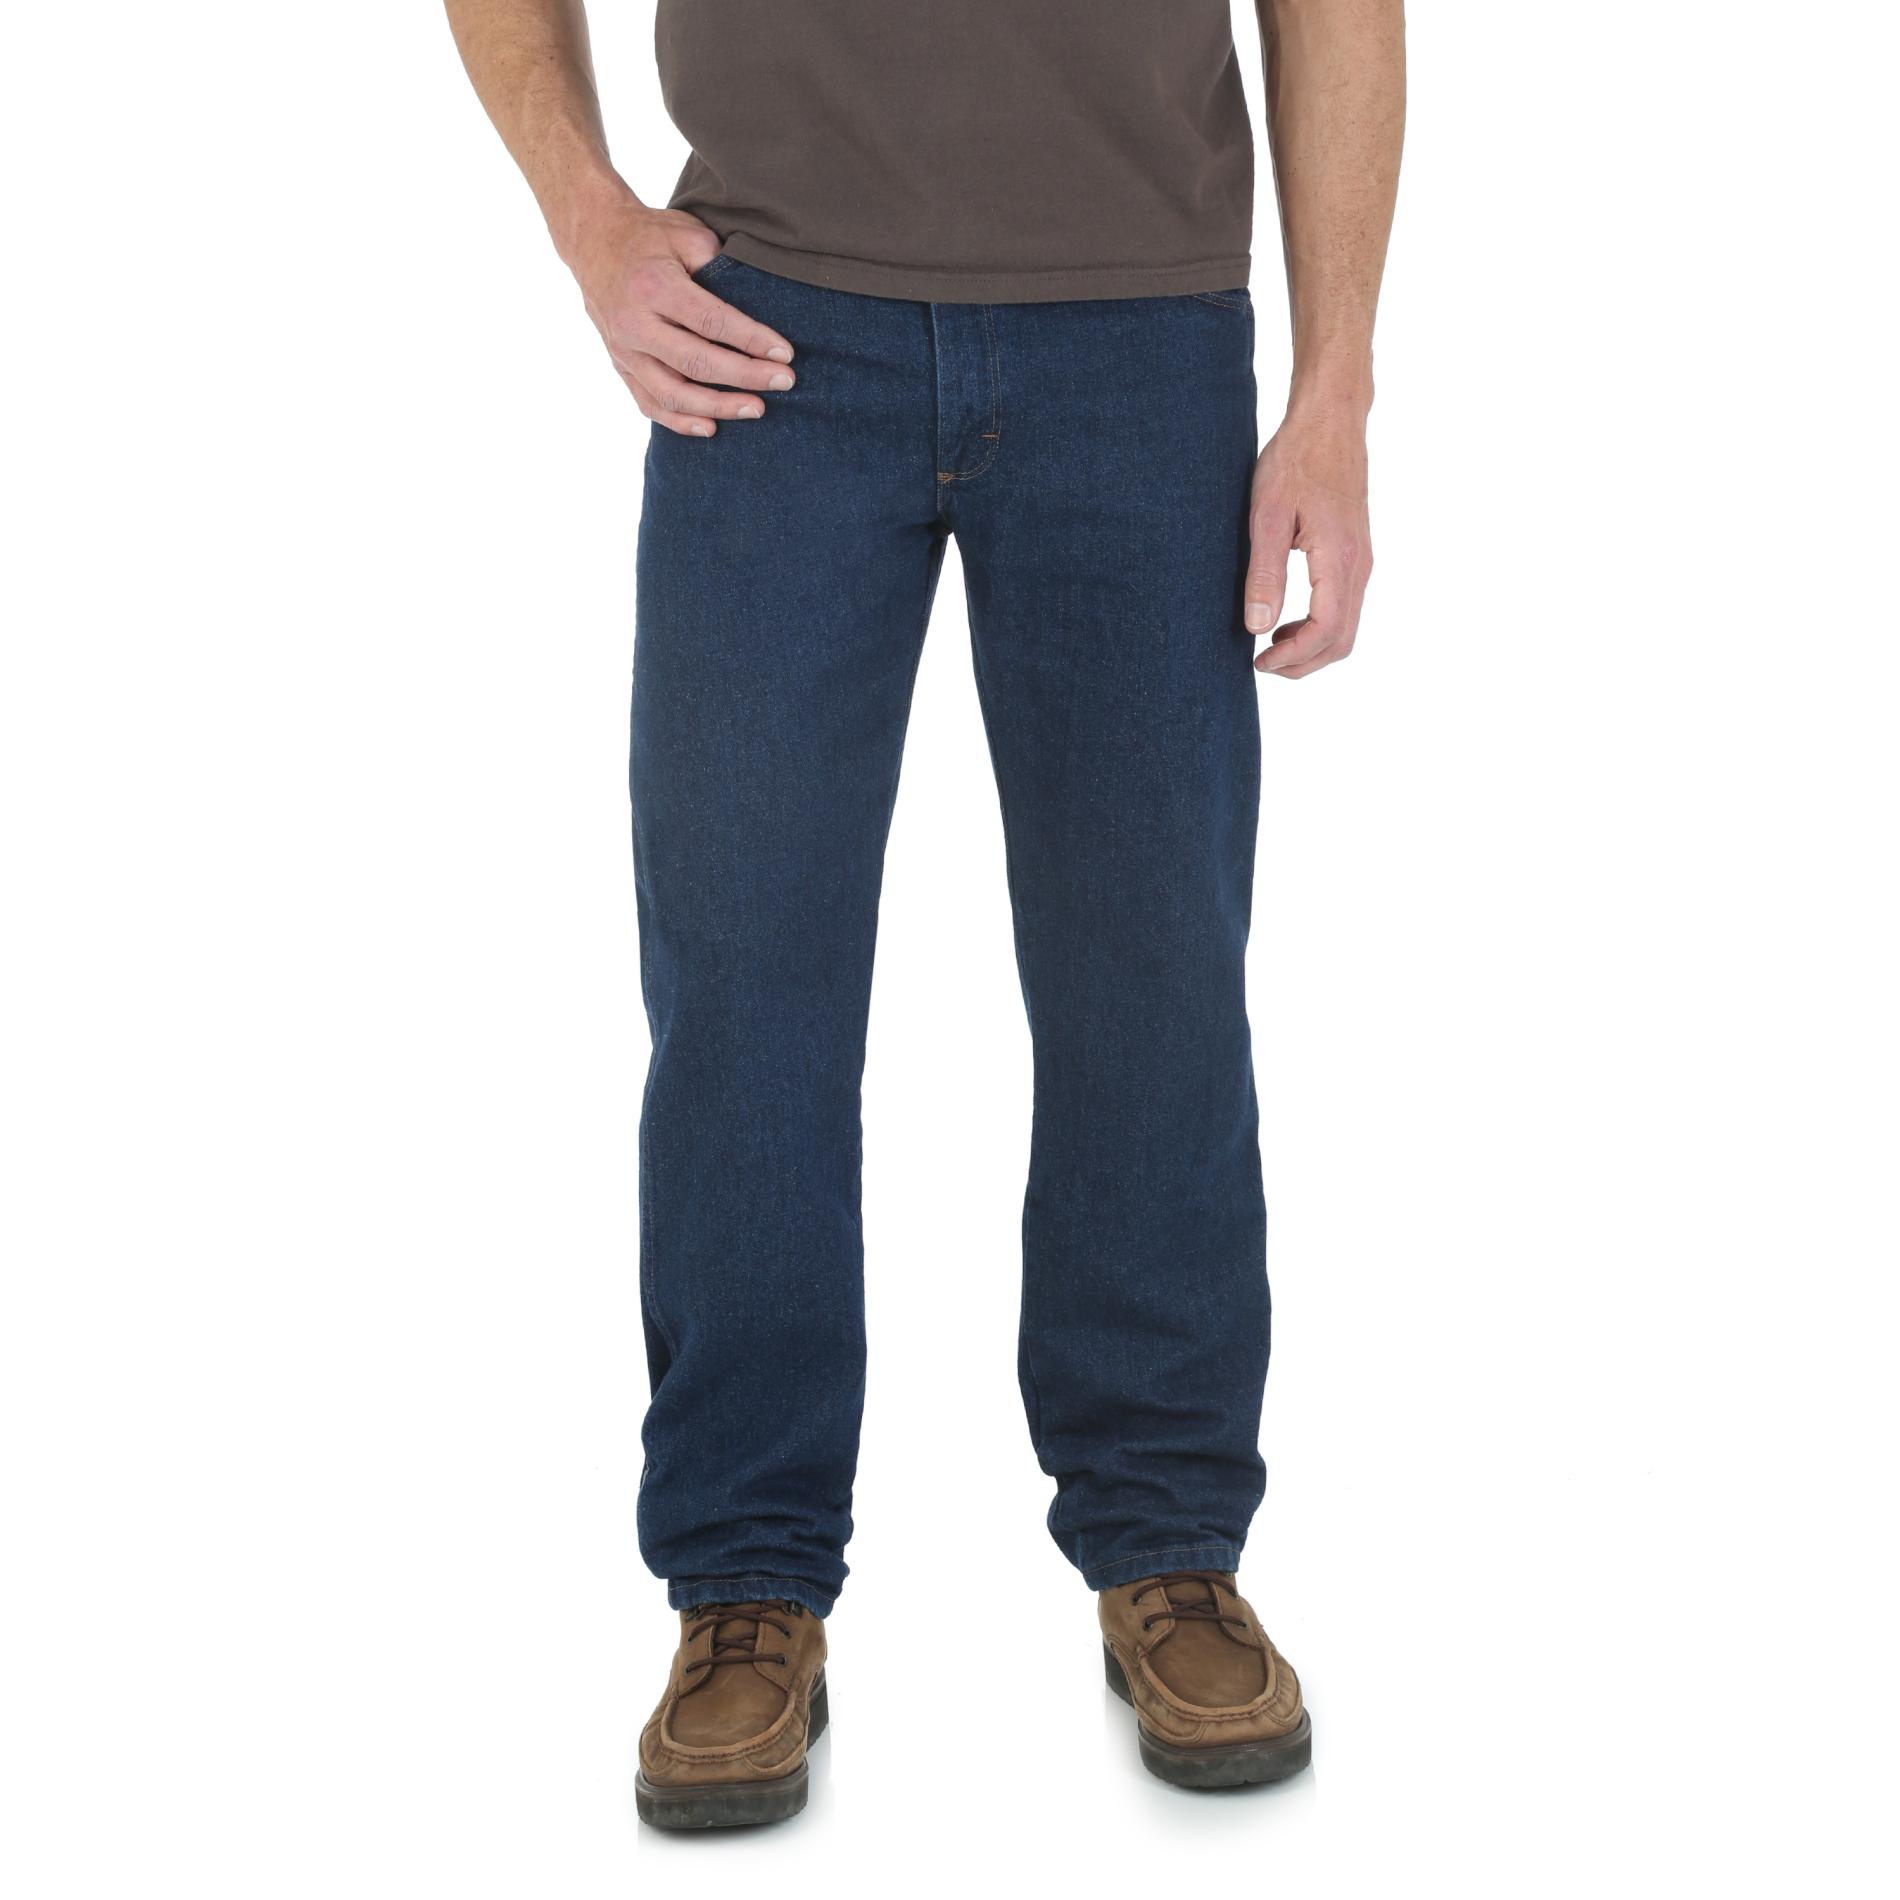 Men's Big & Tall Relaxed Fit Jeans: Shop Denim at Kmart